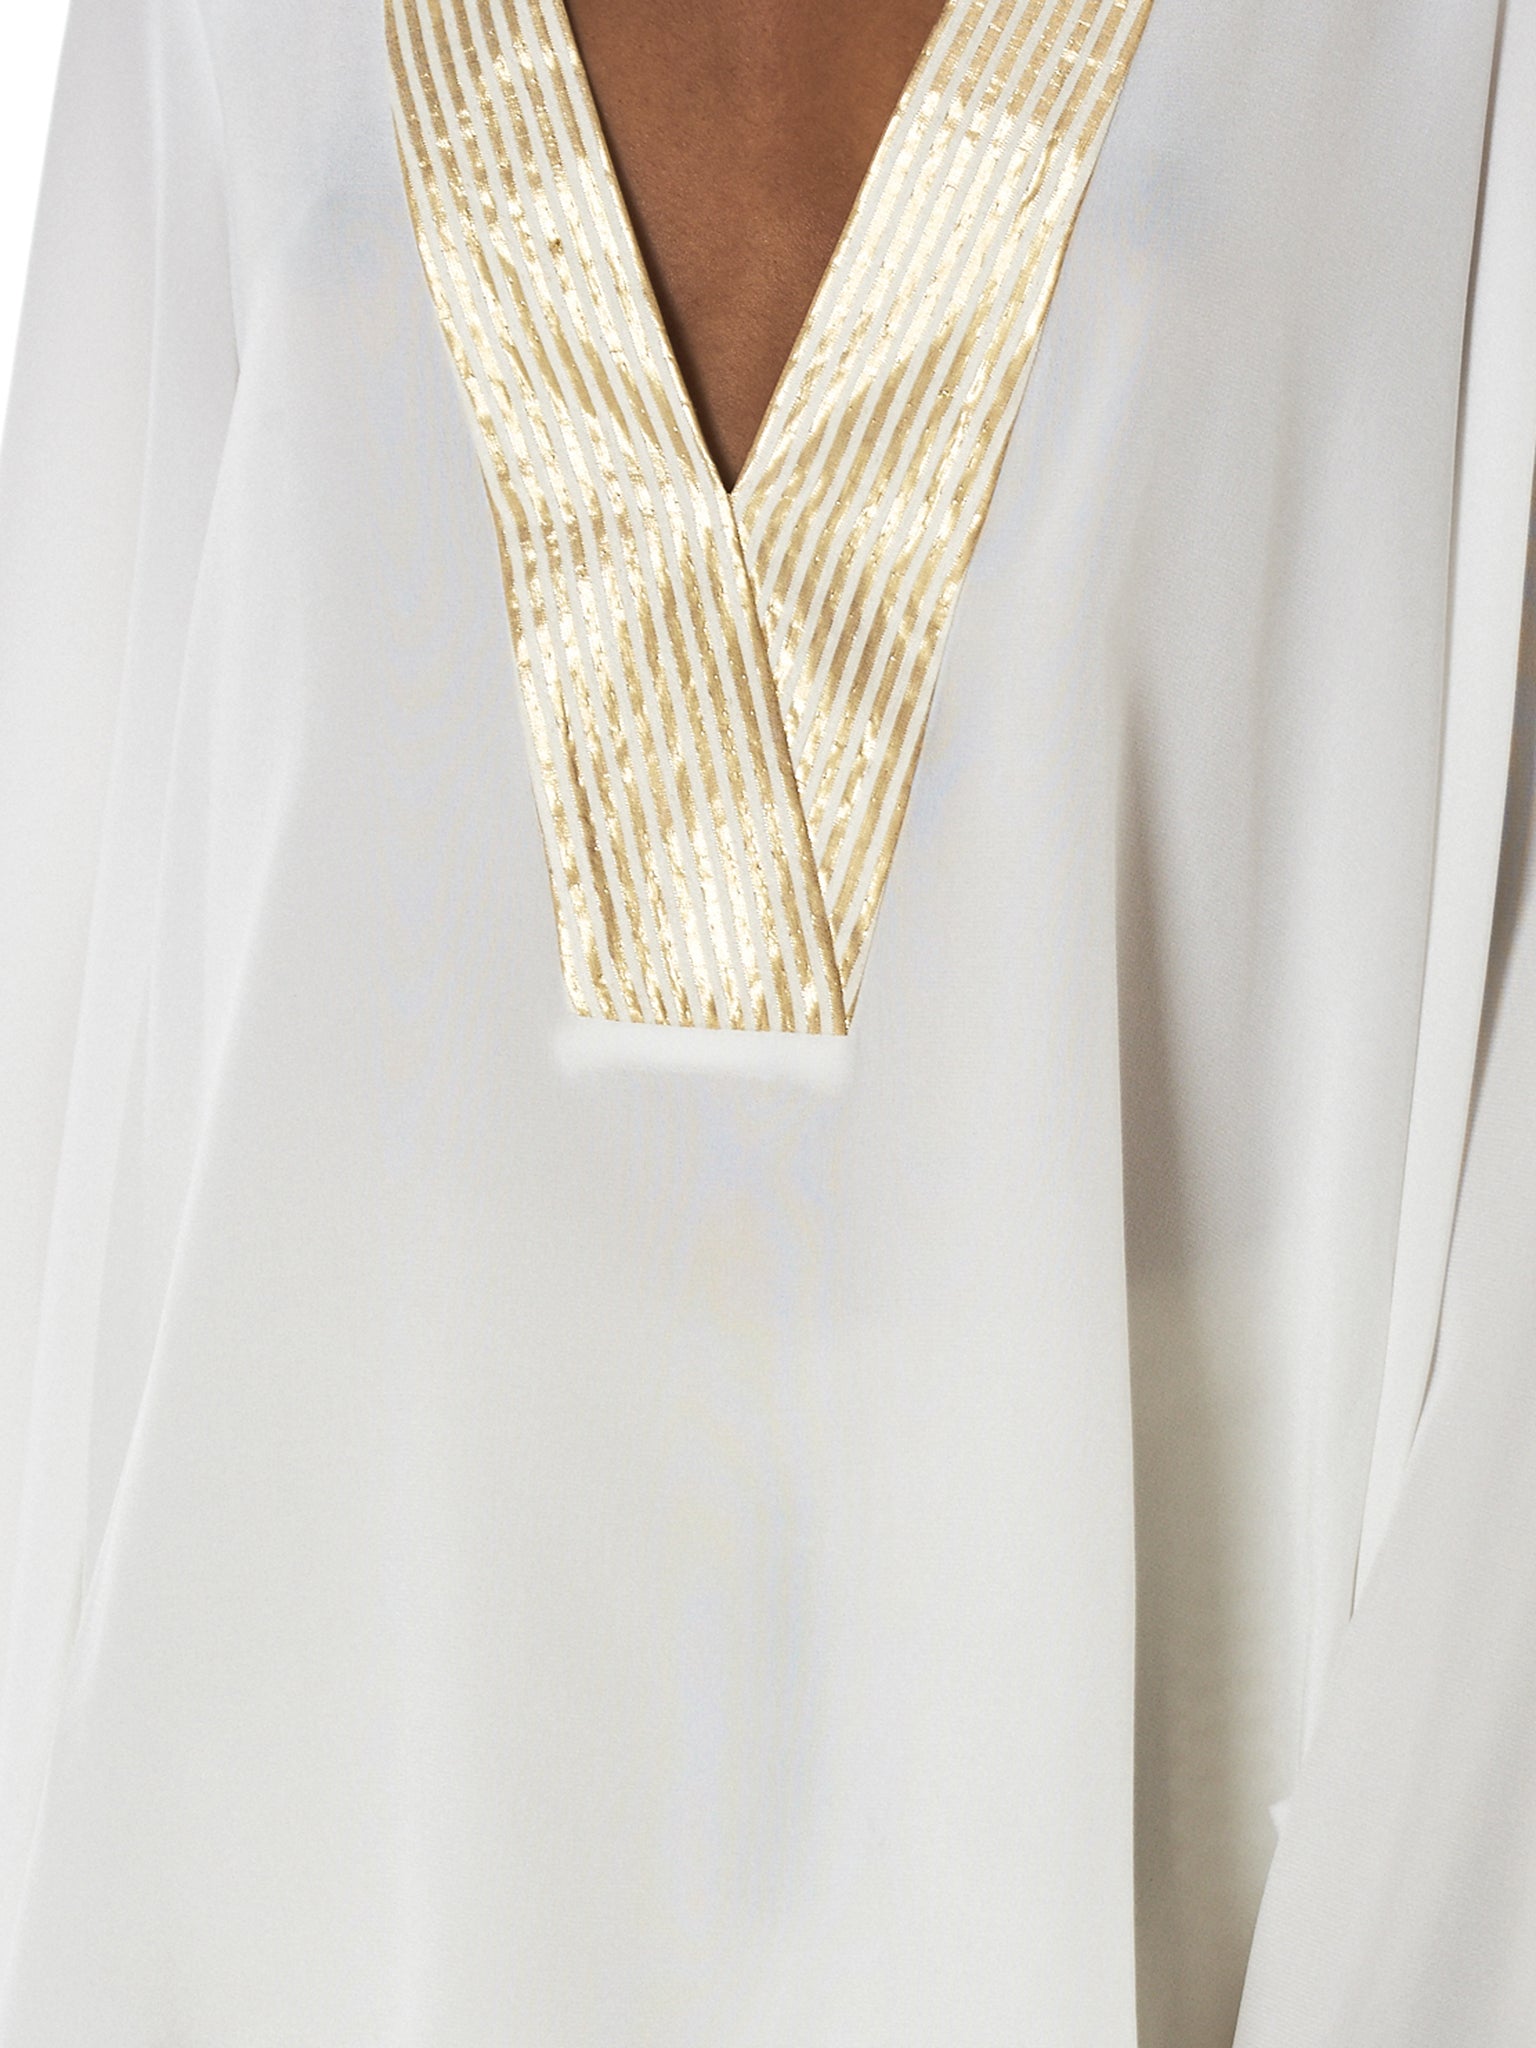 Zeus + Dione Gold Striped Blouse - Hlorenzo Detail 2